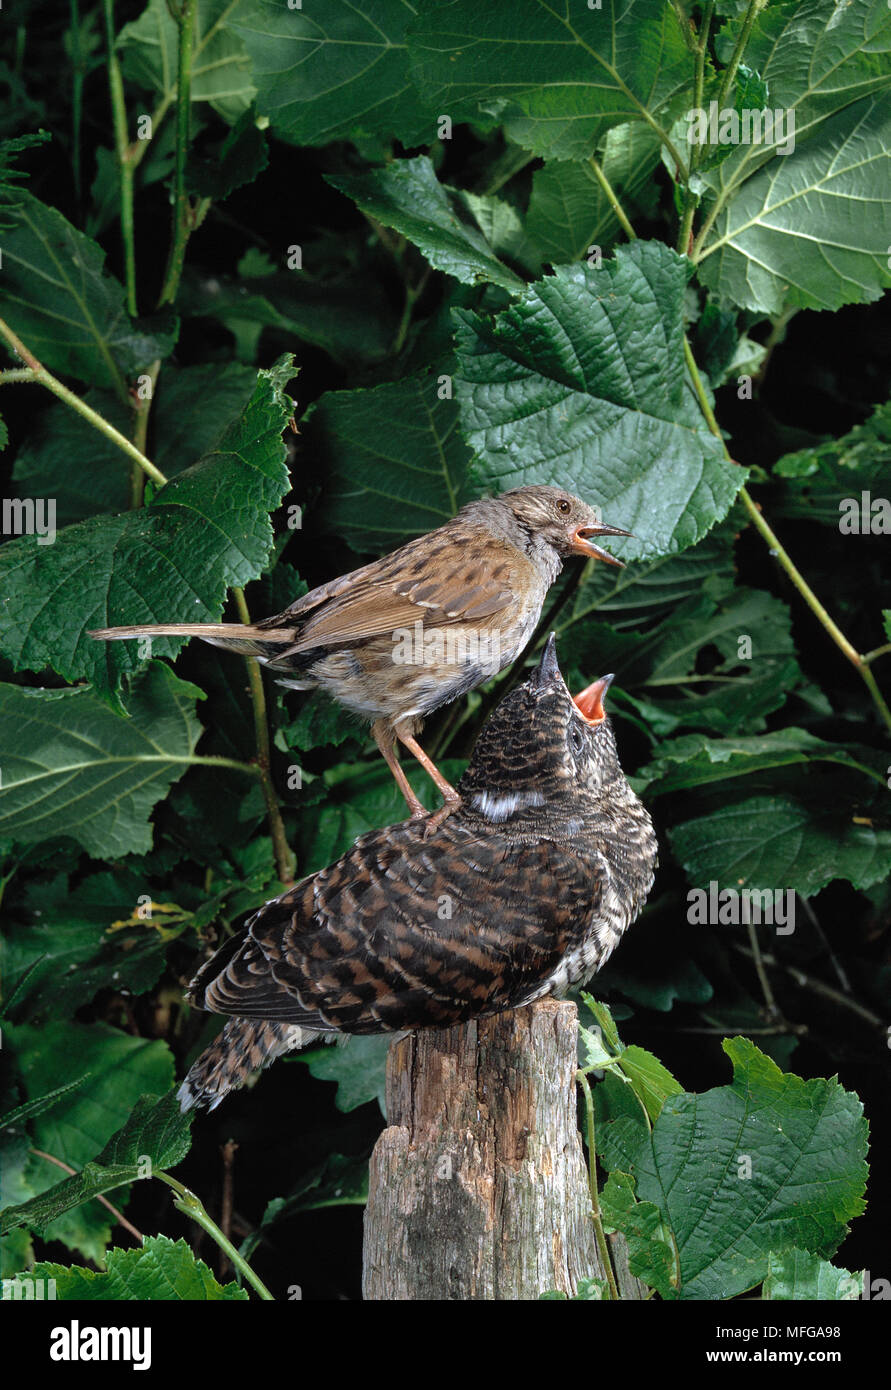 CUCKOO young perched on post  Cuculus canorus being fed by Dunnock or Hedge Sparrow  Prunella modularis foster parent Stock Photo